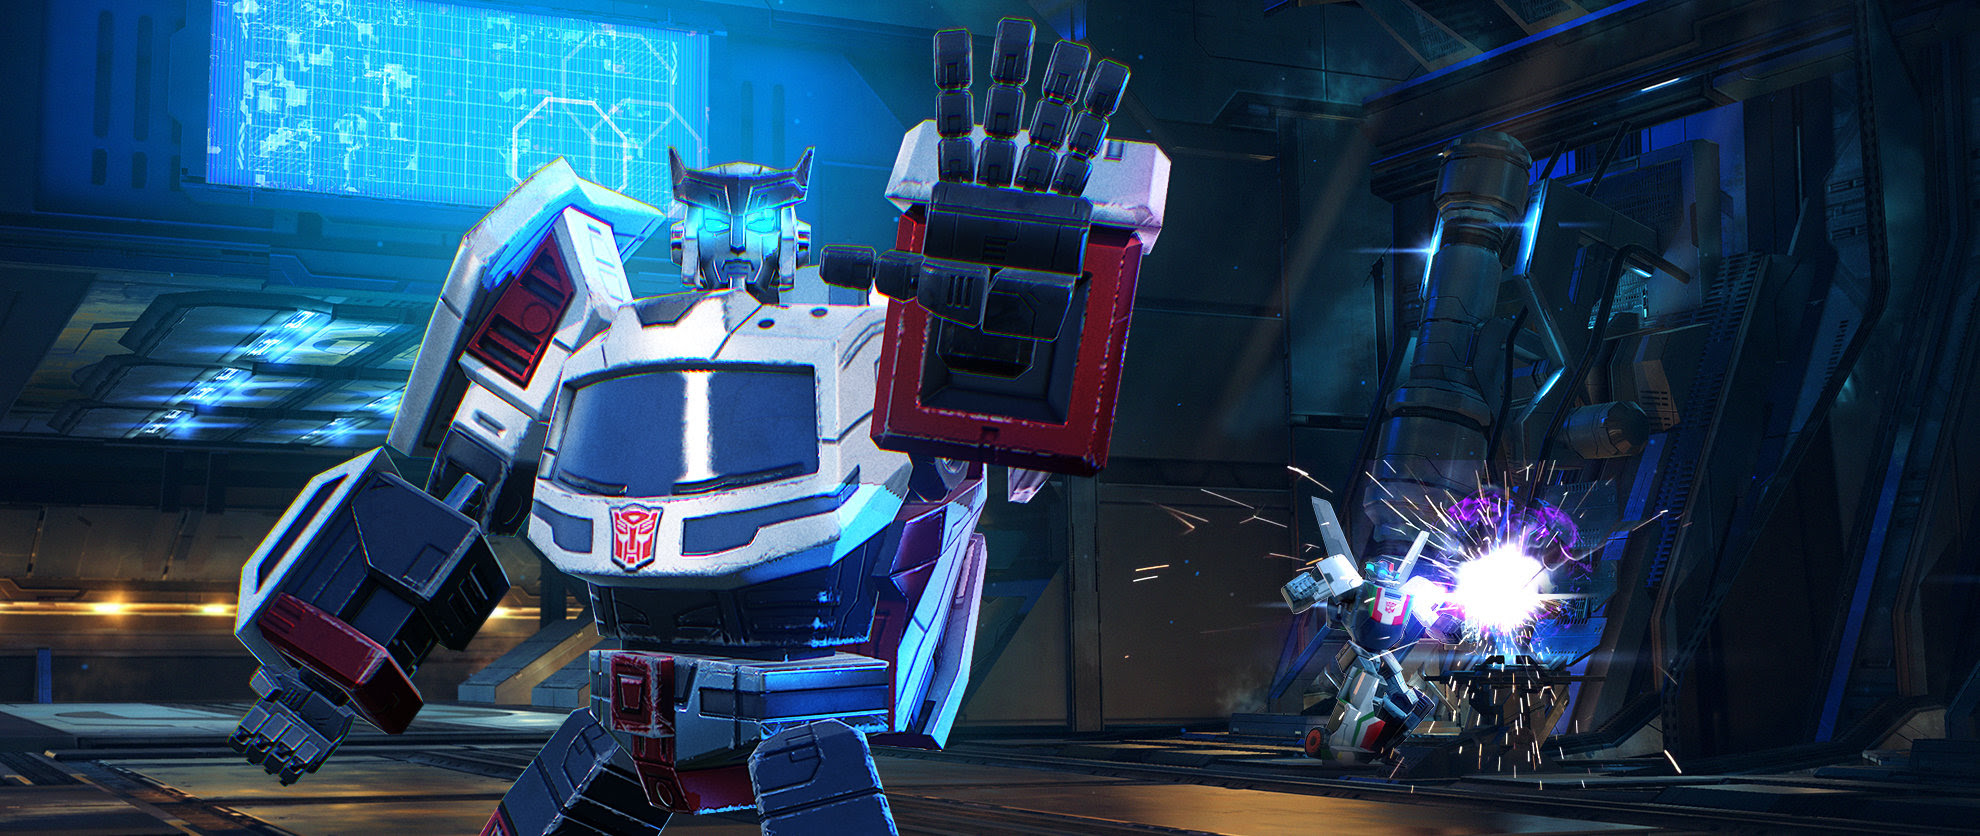 Transformers News: Transformers: Earth Wars - Party Crashers